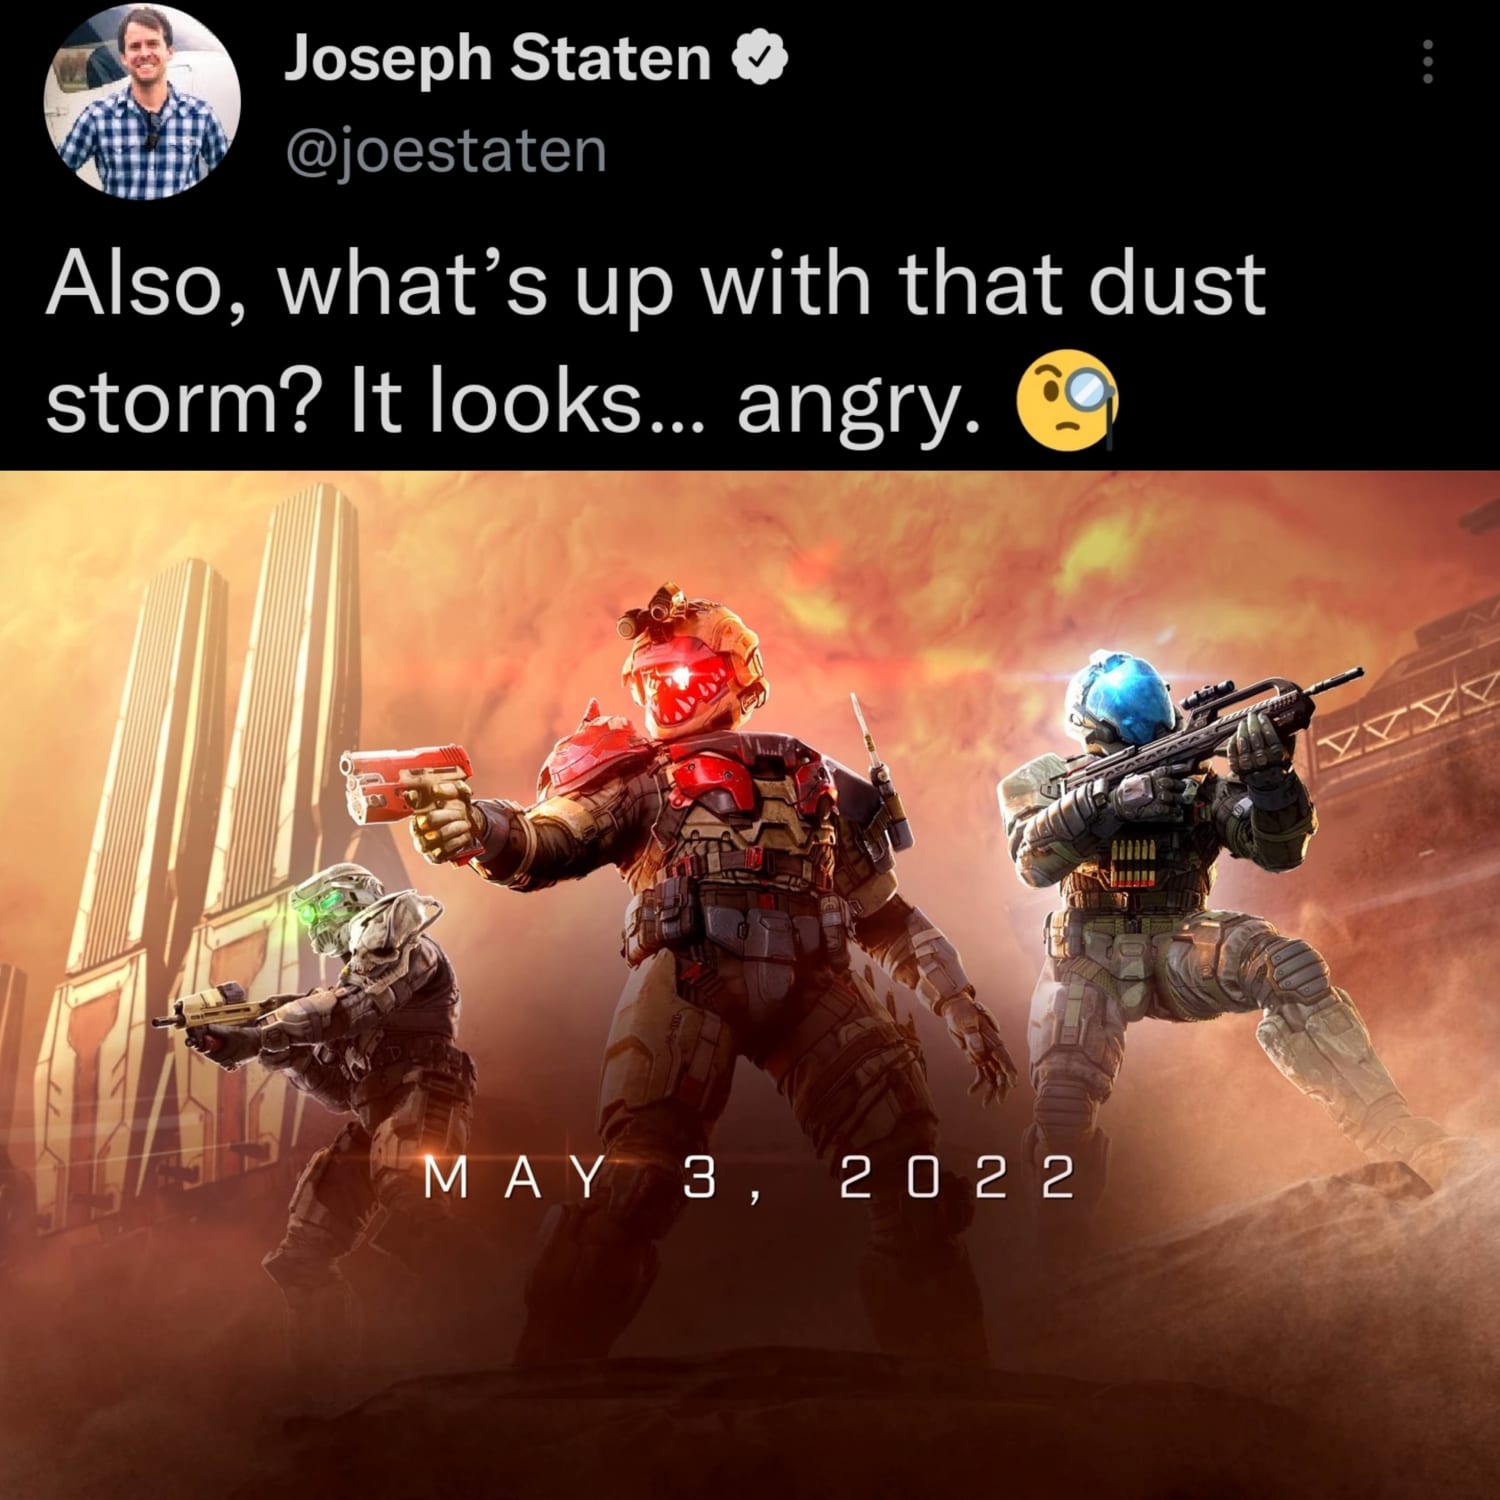 Joe Staten has pointed out the dust storm looks "angry", what could this possibly be hinting to?